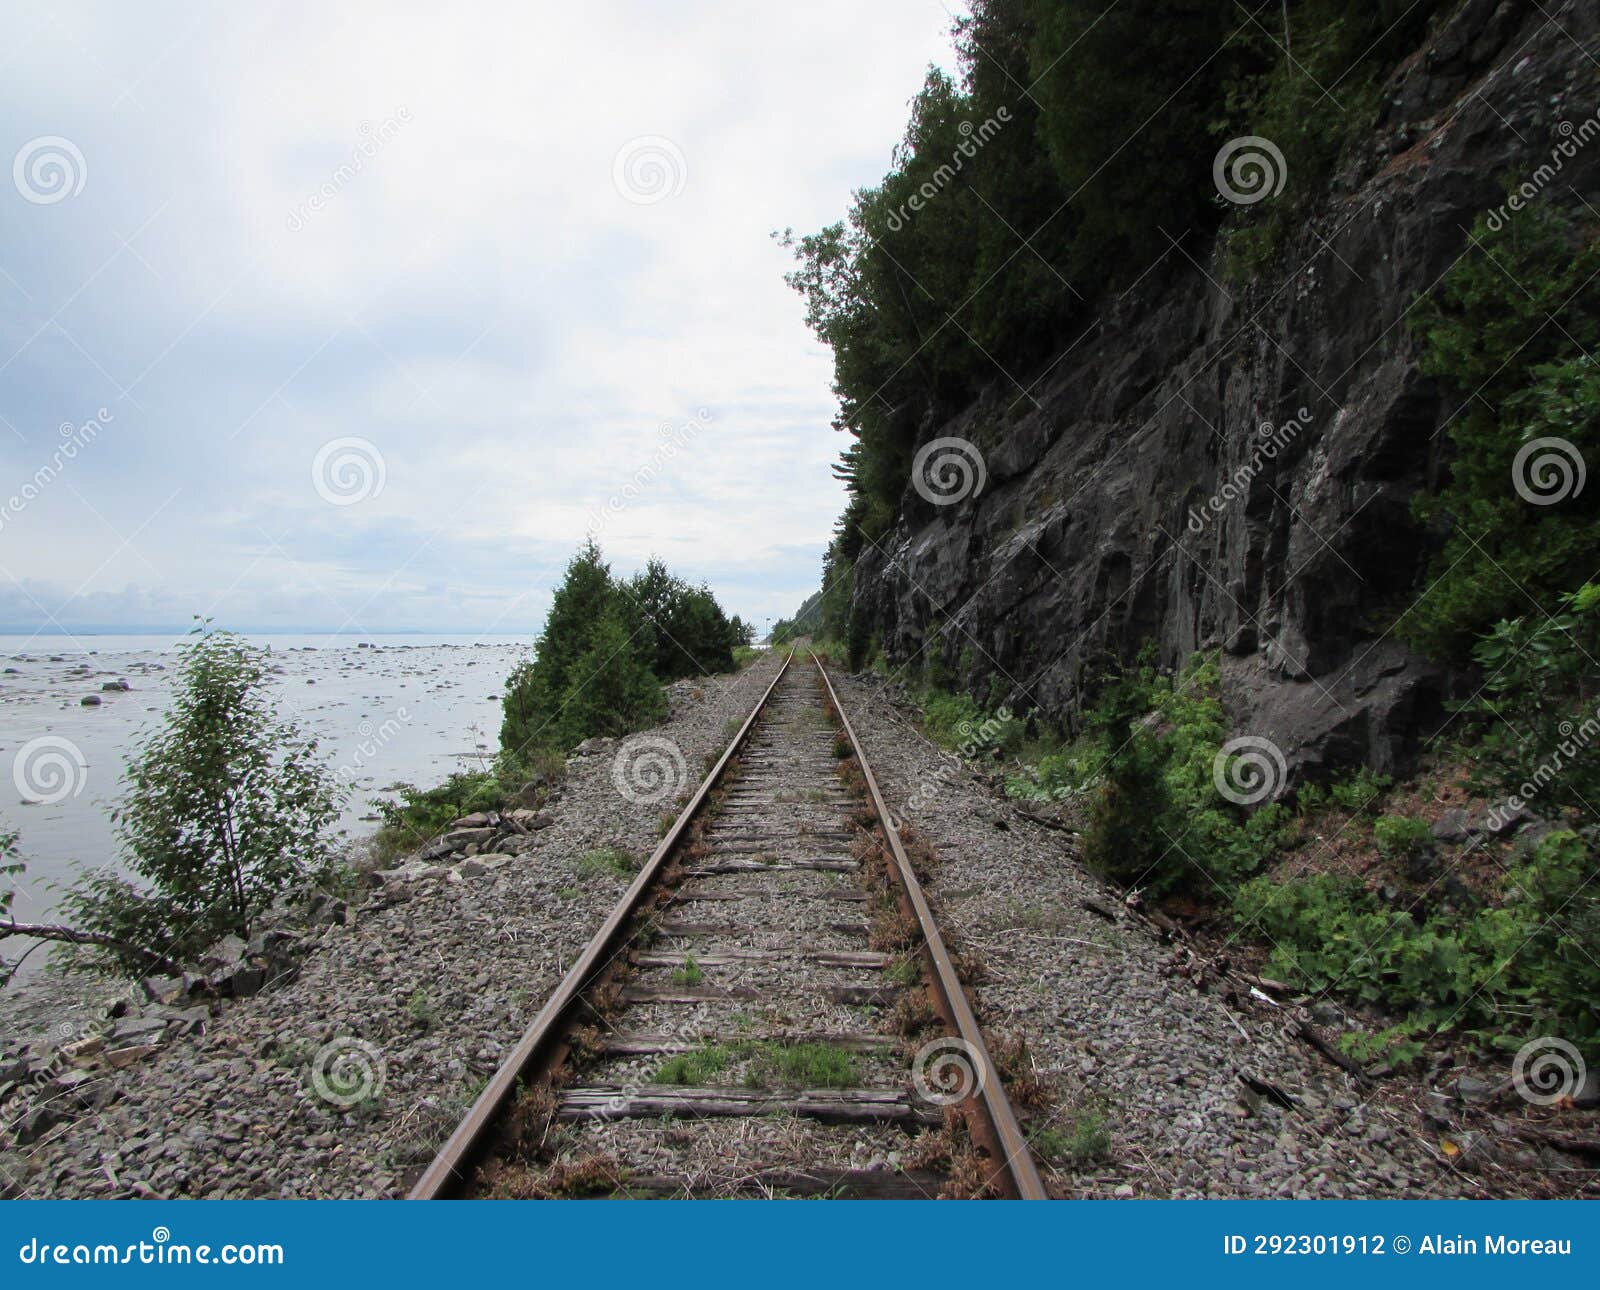 railway along the st. lawrence river